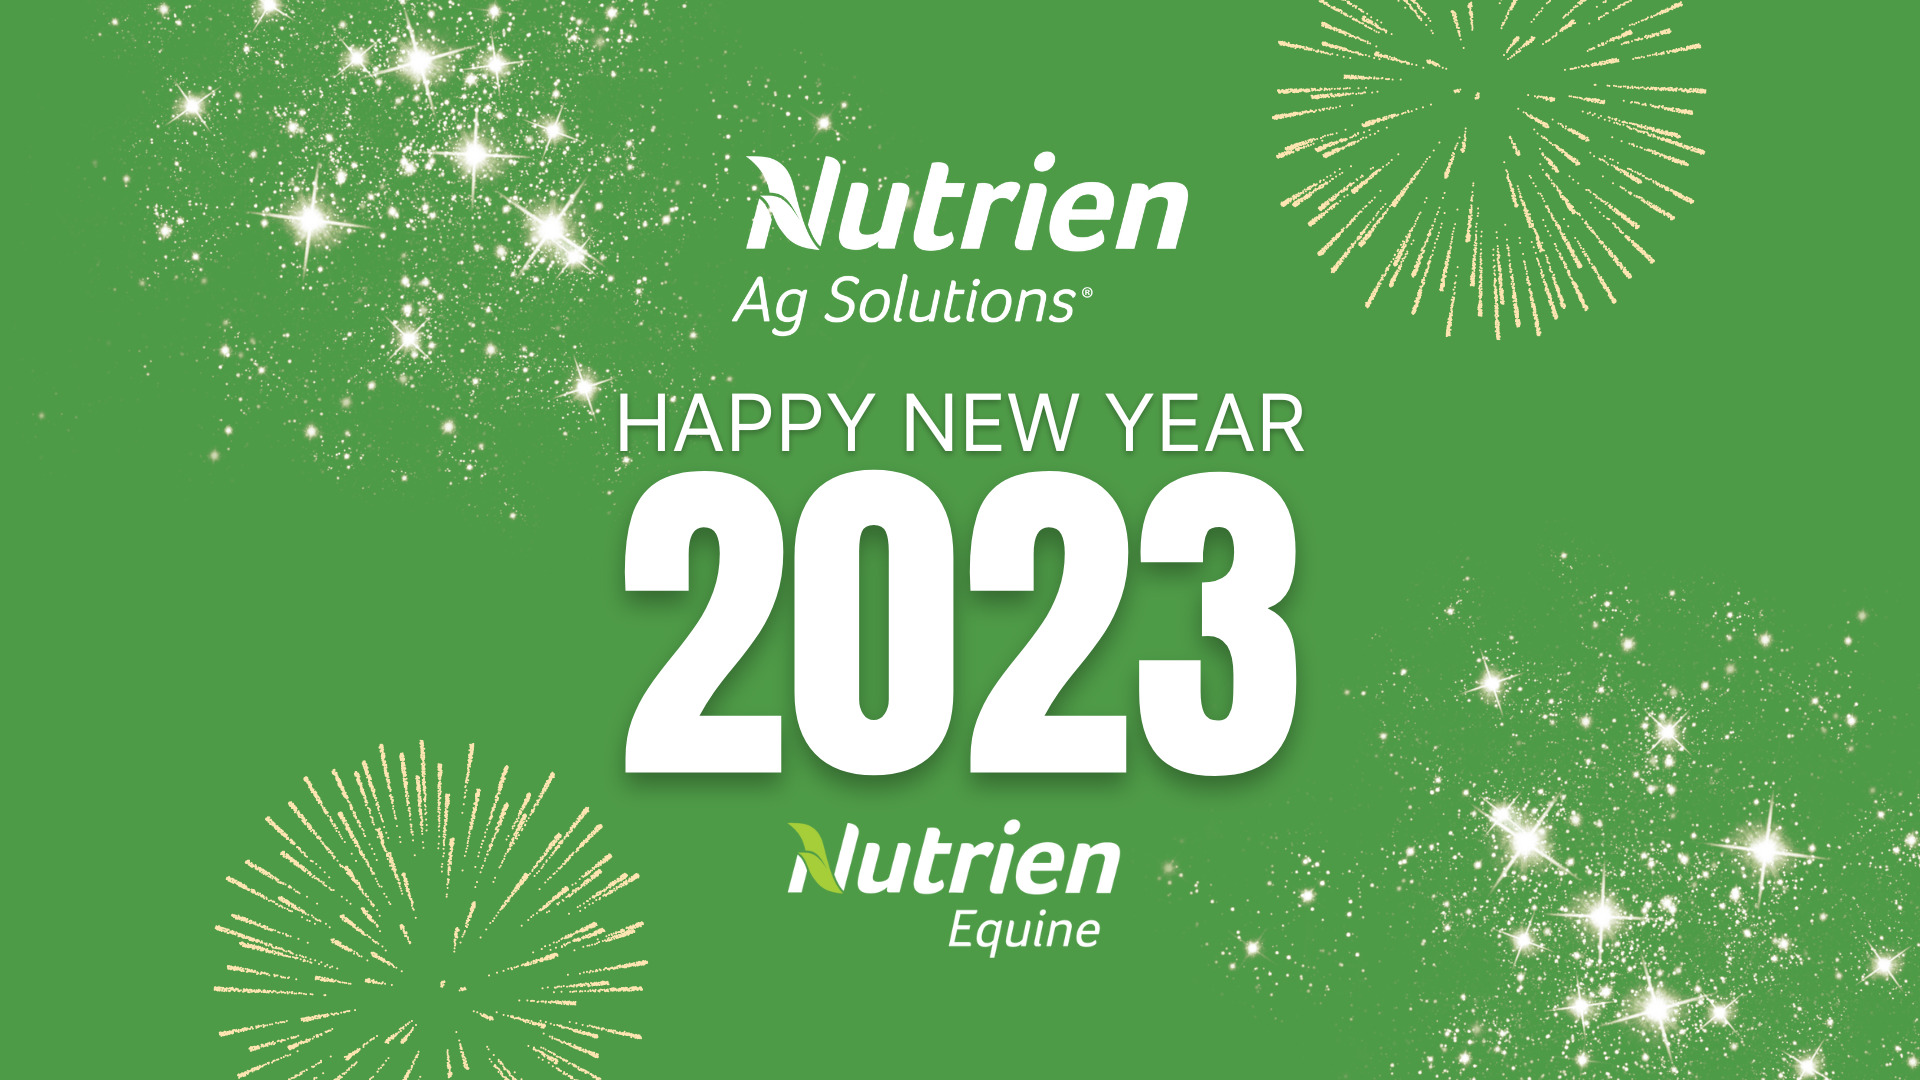 Celebrating the New Year with Pedigree Updates for 2023 Nutrien Equine Yearling Sales